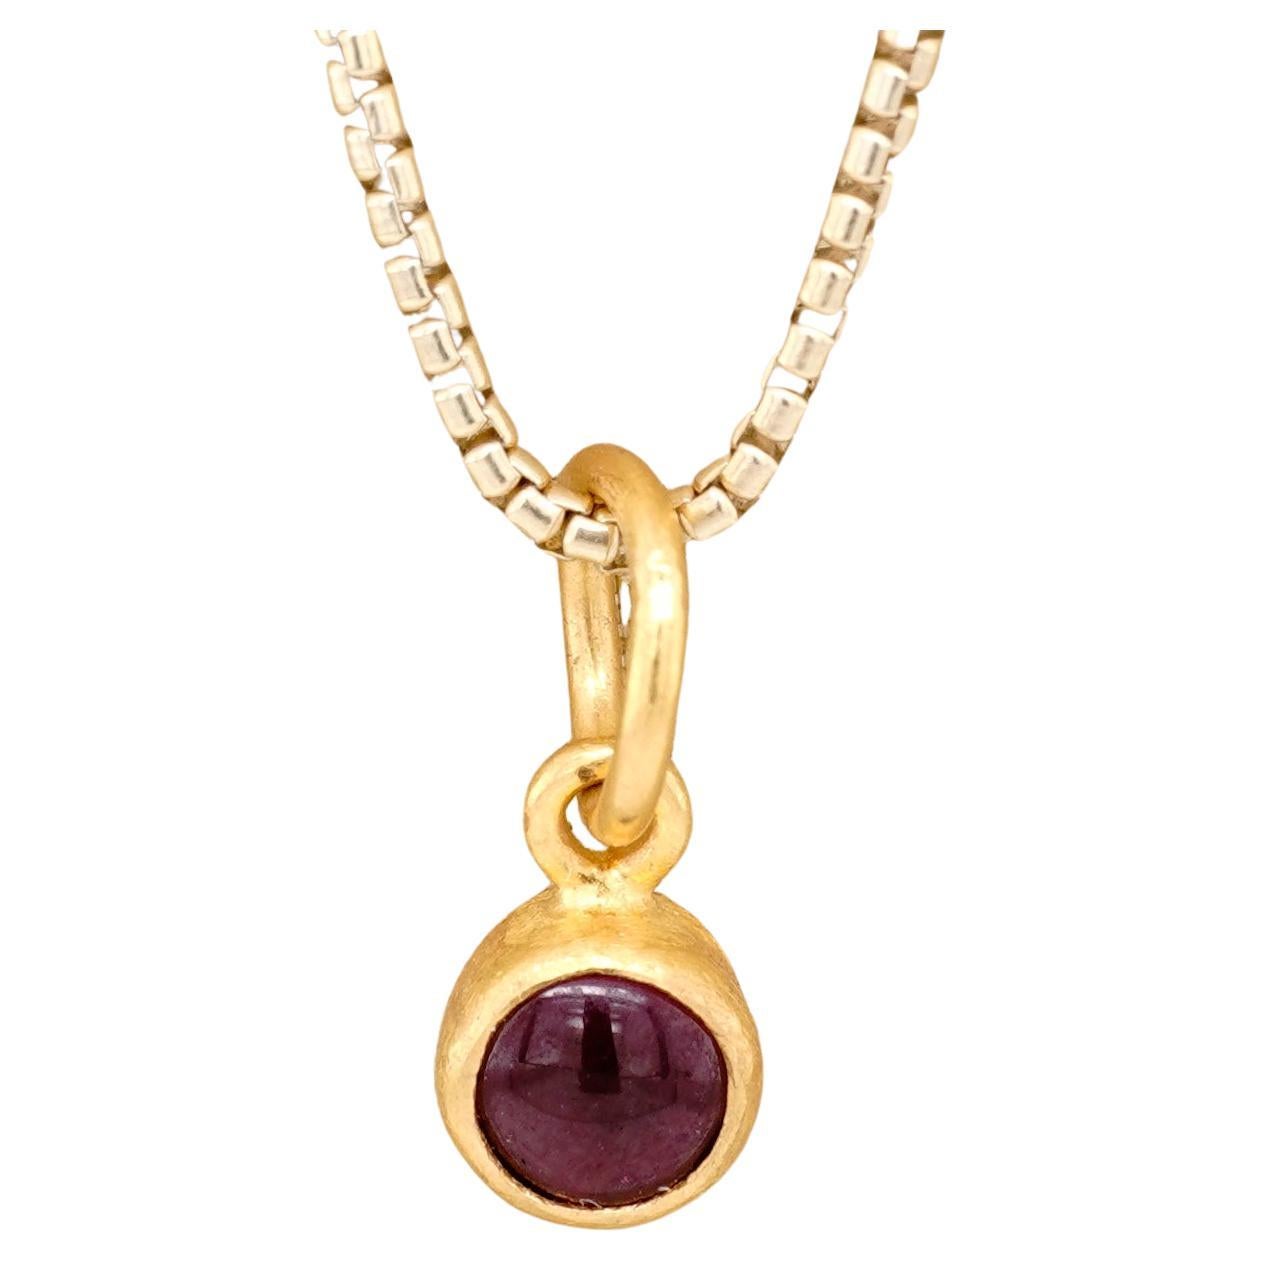 24K Gold Round, Smooth Garnet Miniature Pendant, Handmade by Prehistoric Works of Istanbul, Turkey
Garnet balances energy, bringing serenity or passion as appropriate, and can inspire love and balance the sex drive. Garnet is considered a lucky